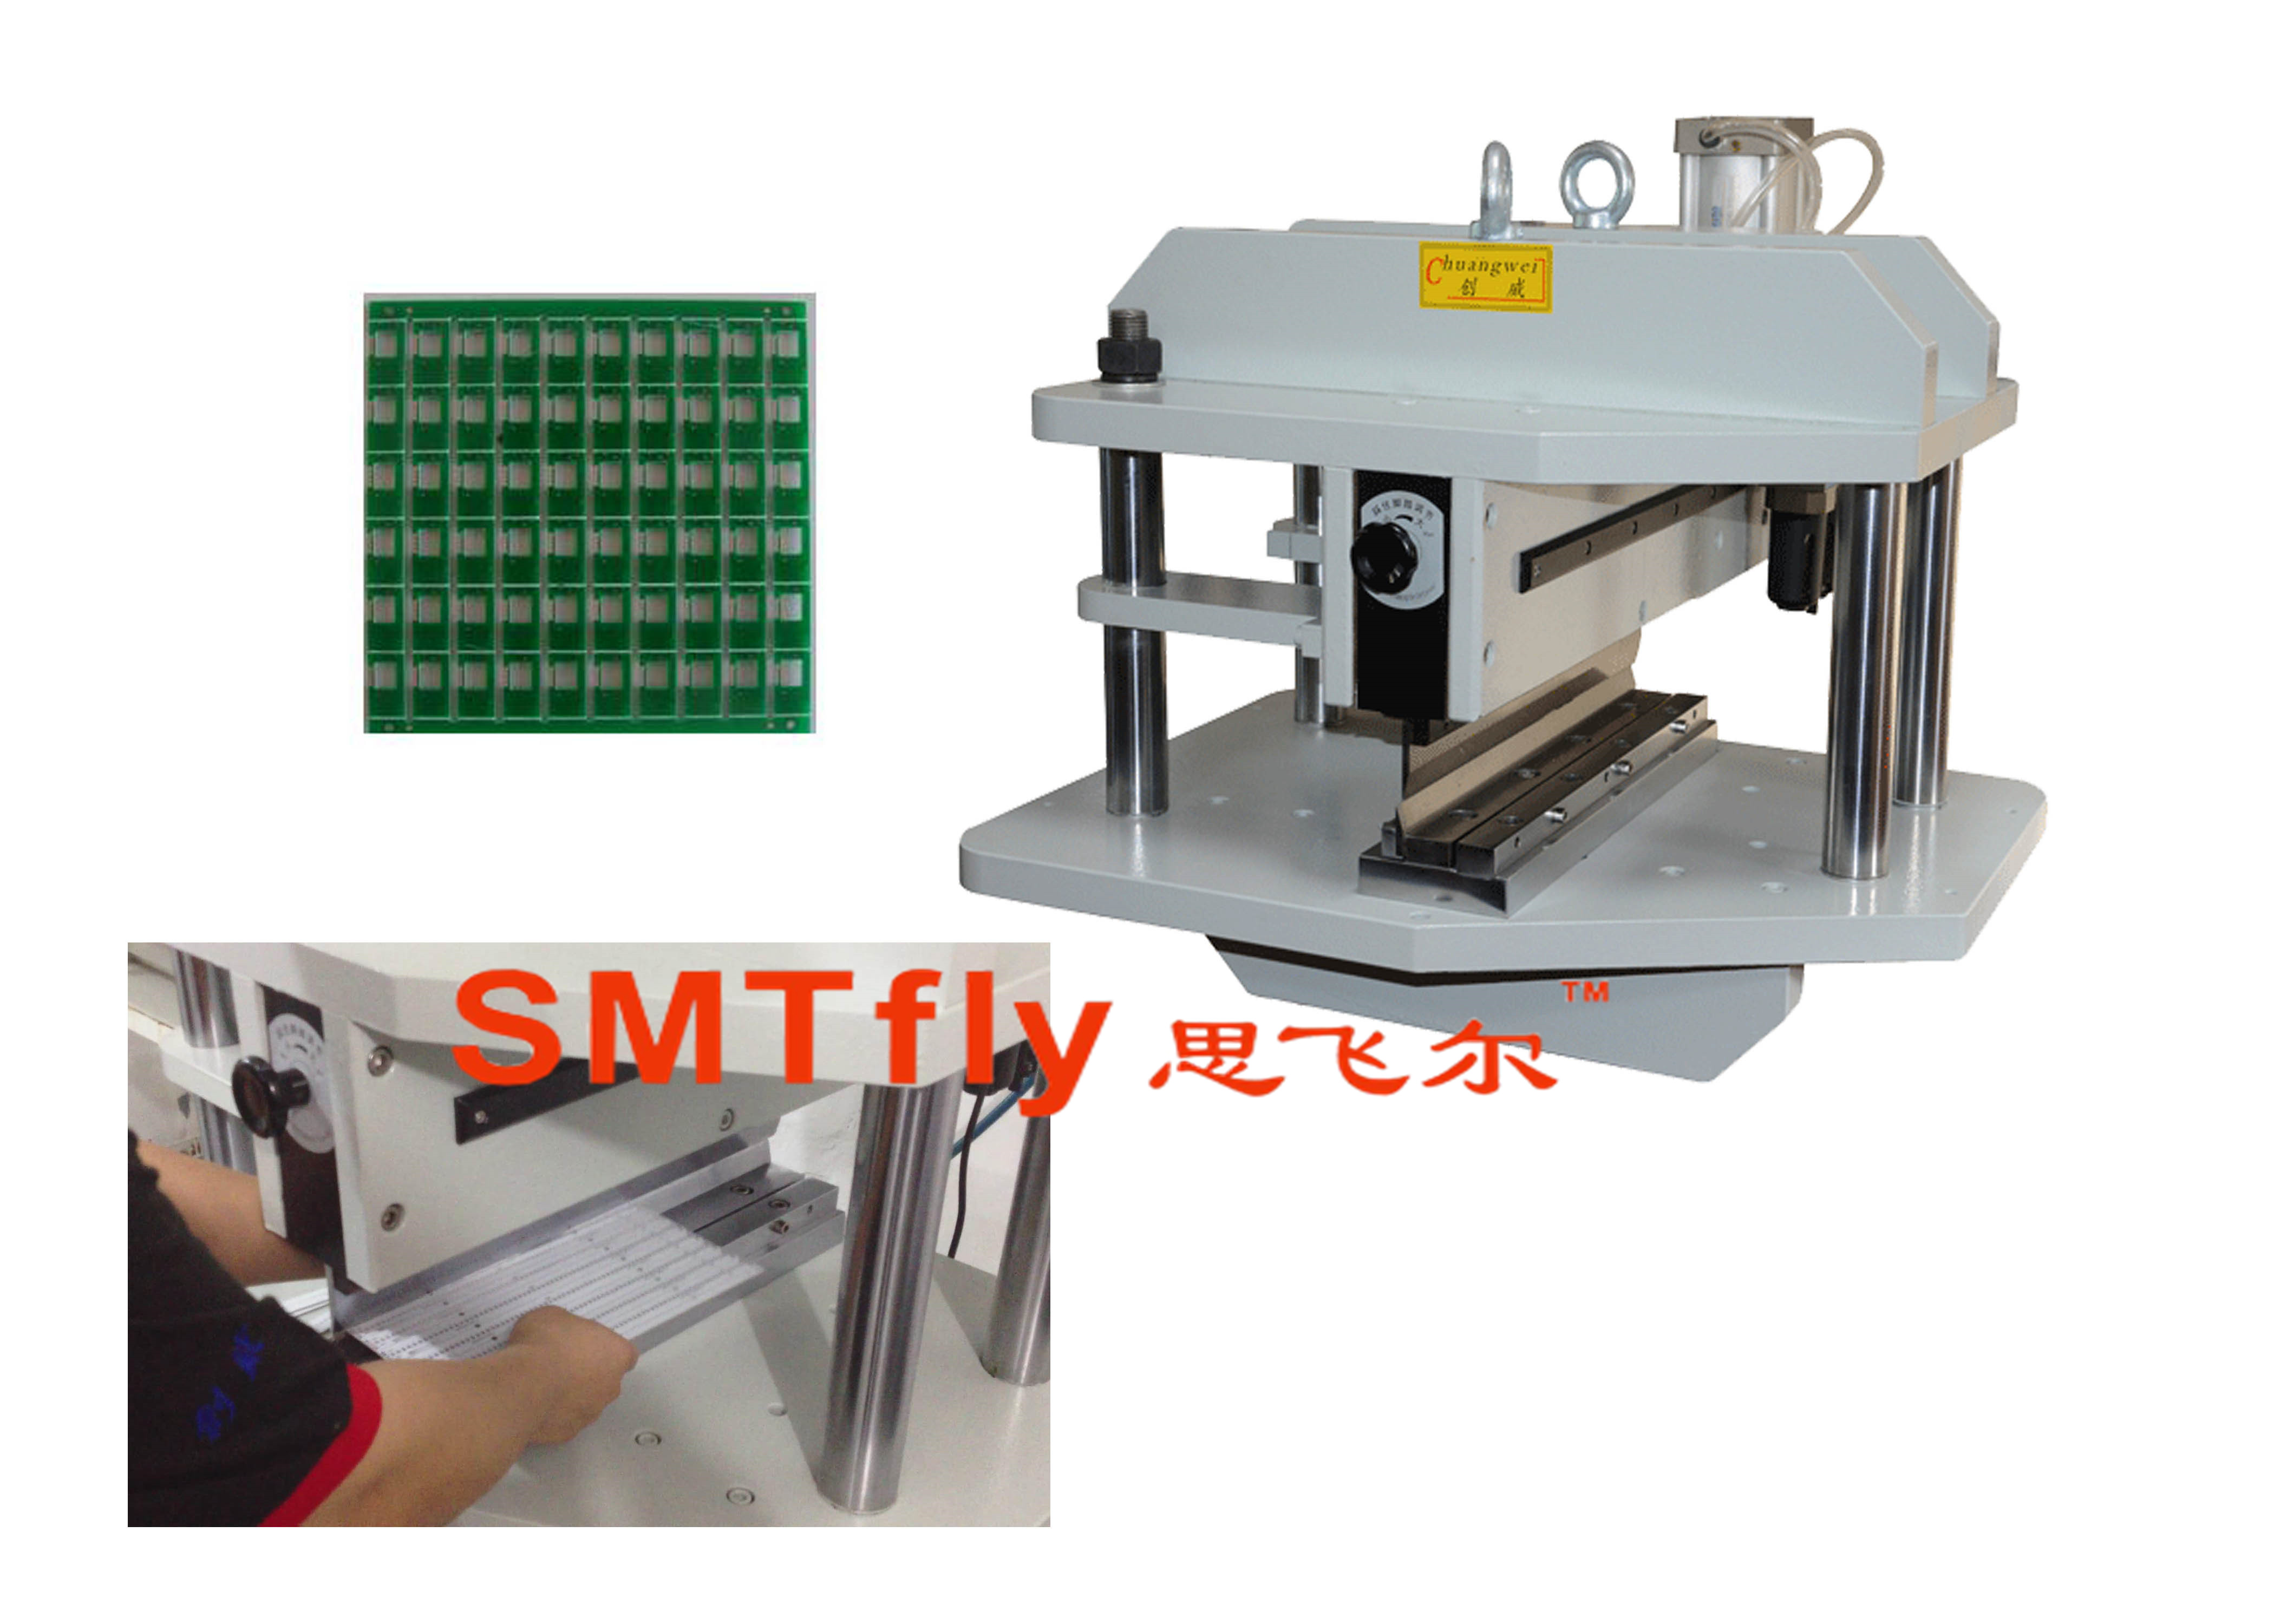 Automatic Power PCB Cutter,SMTfly-450C